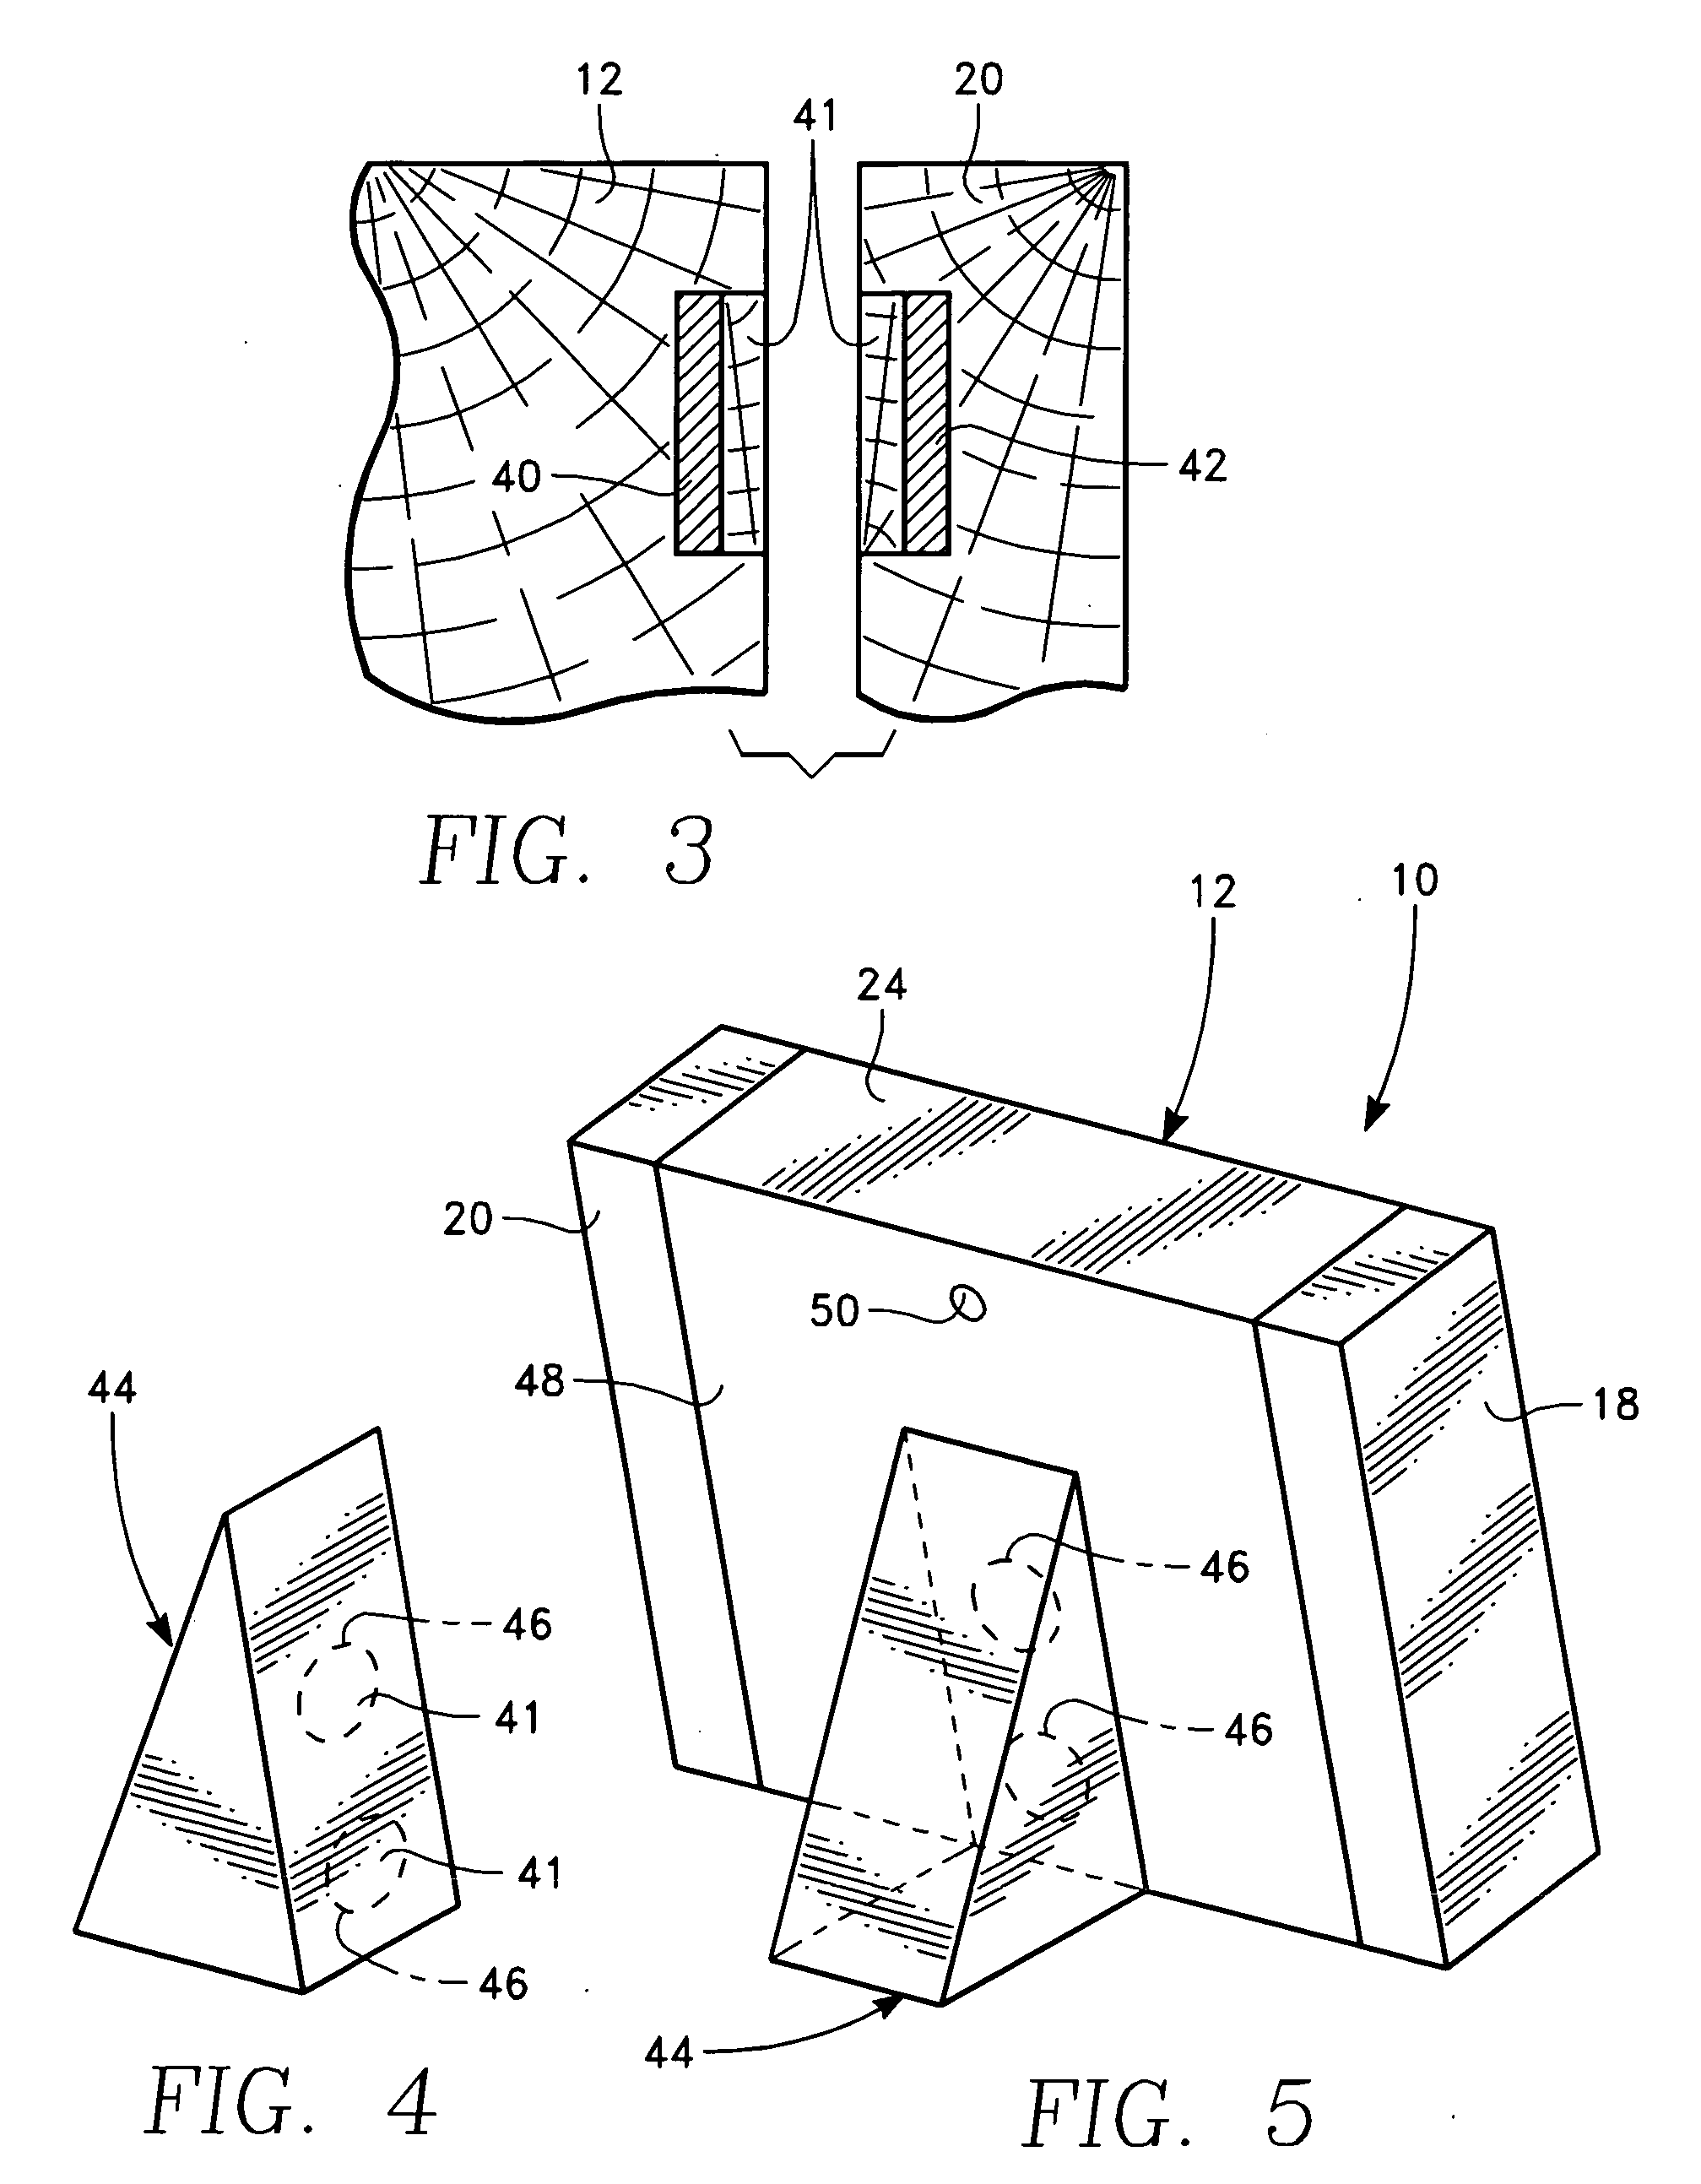 Magnetic modular assembly system for picture frame that includes specialized photography sequence and method of use